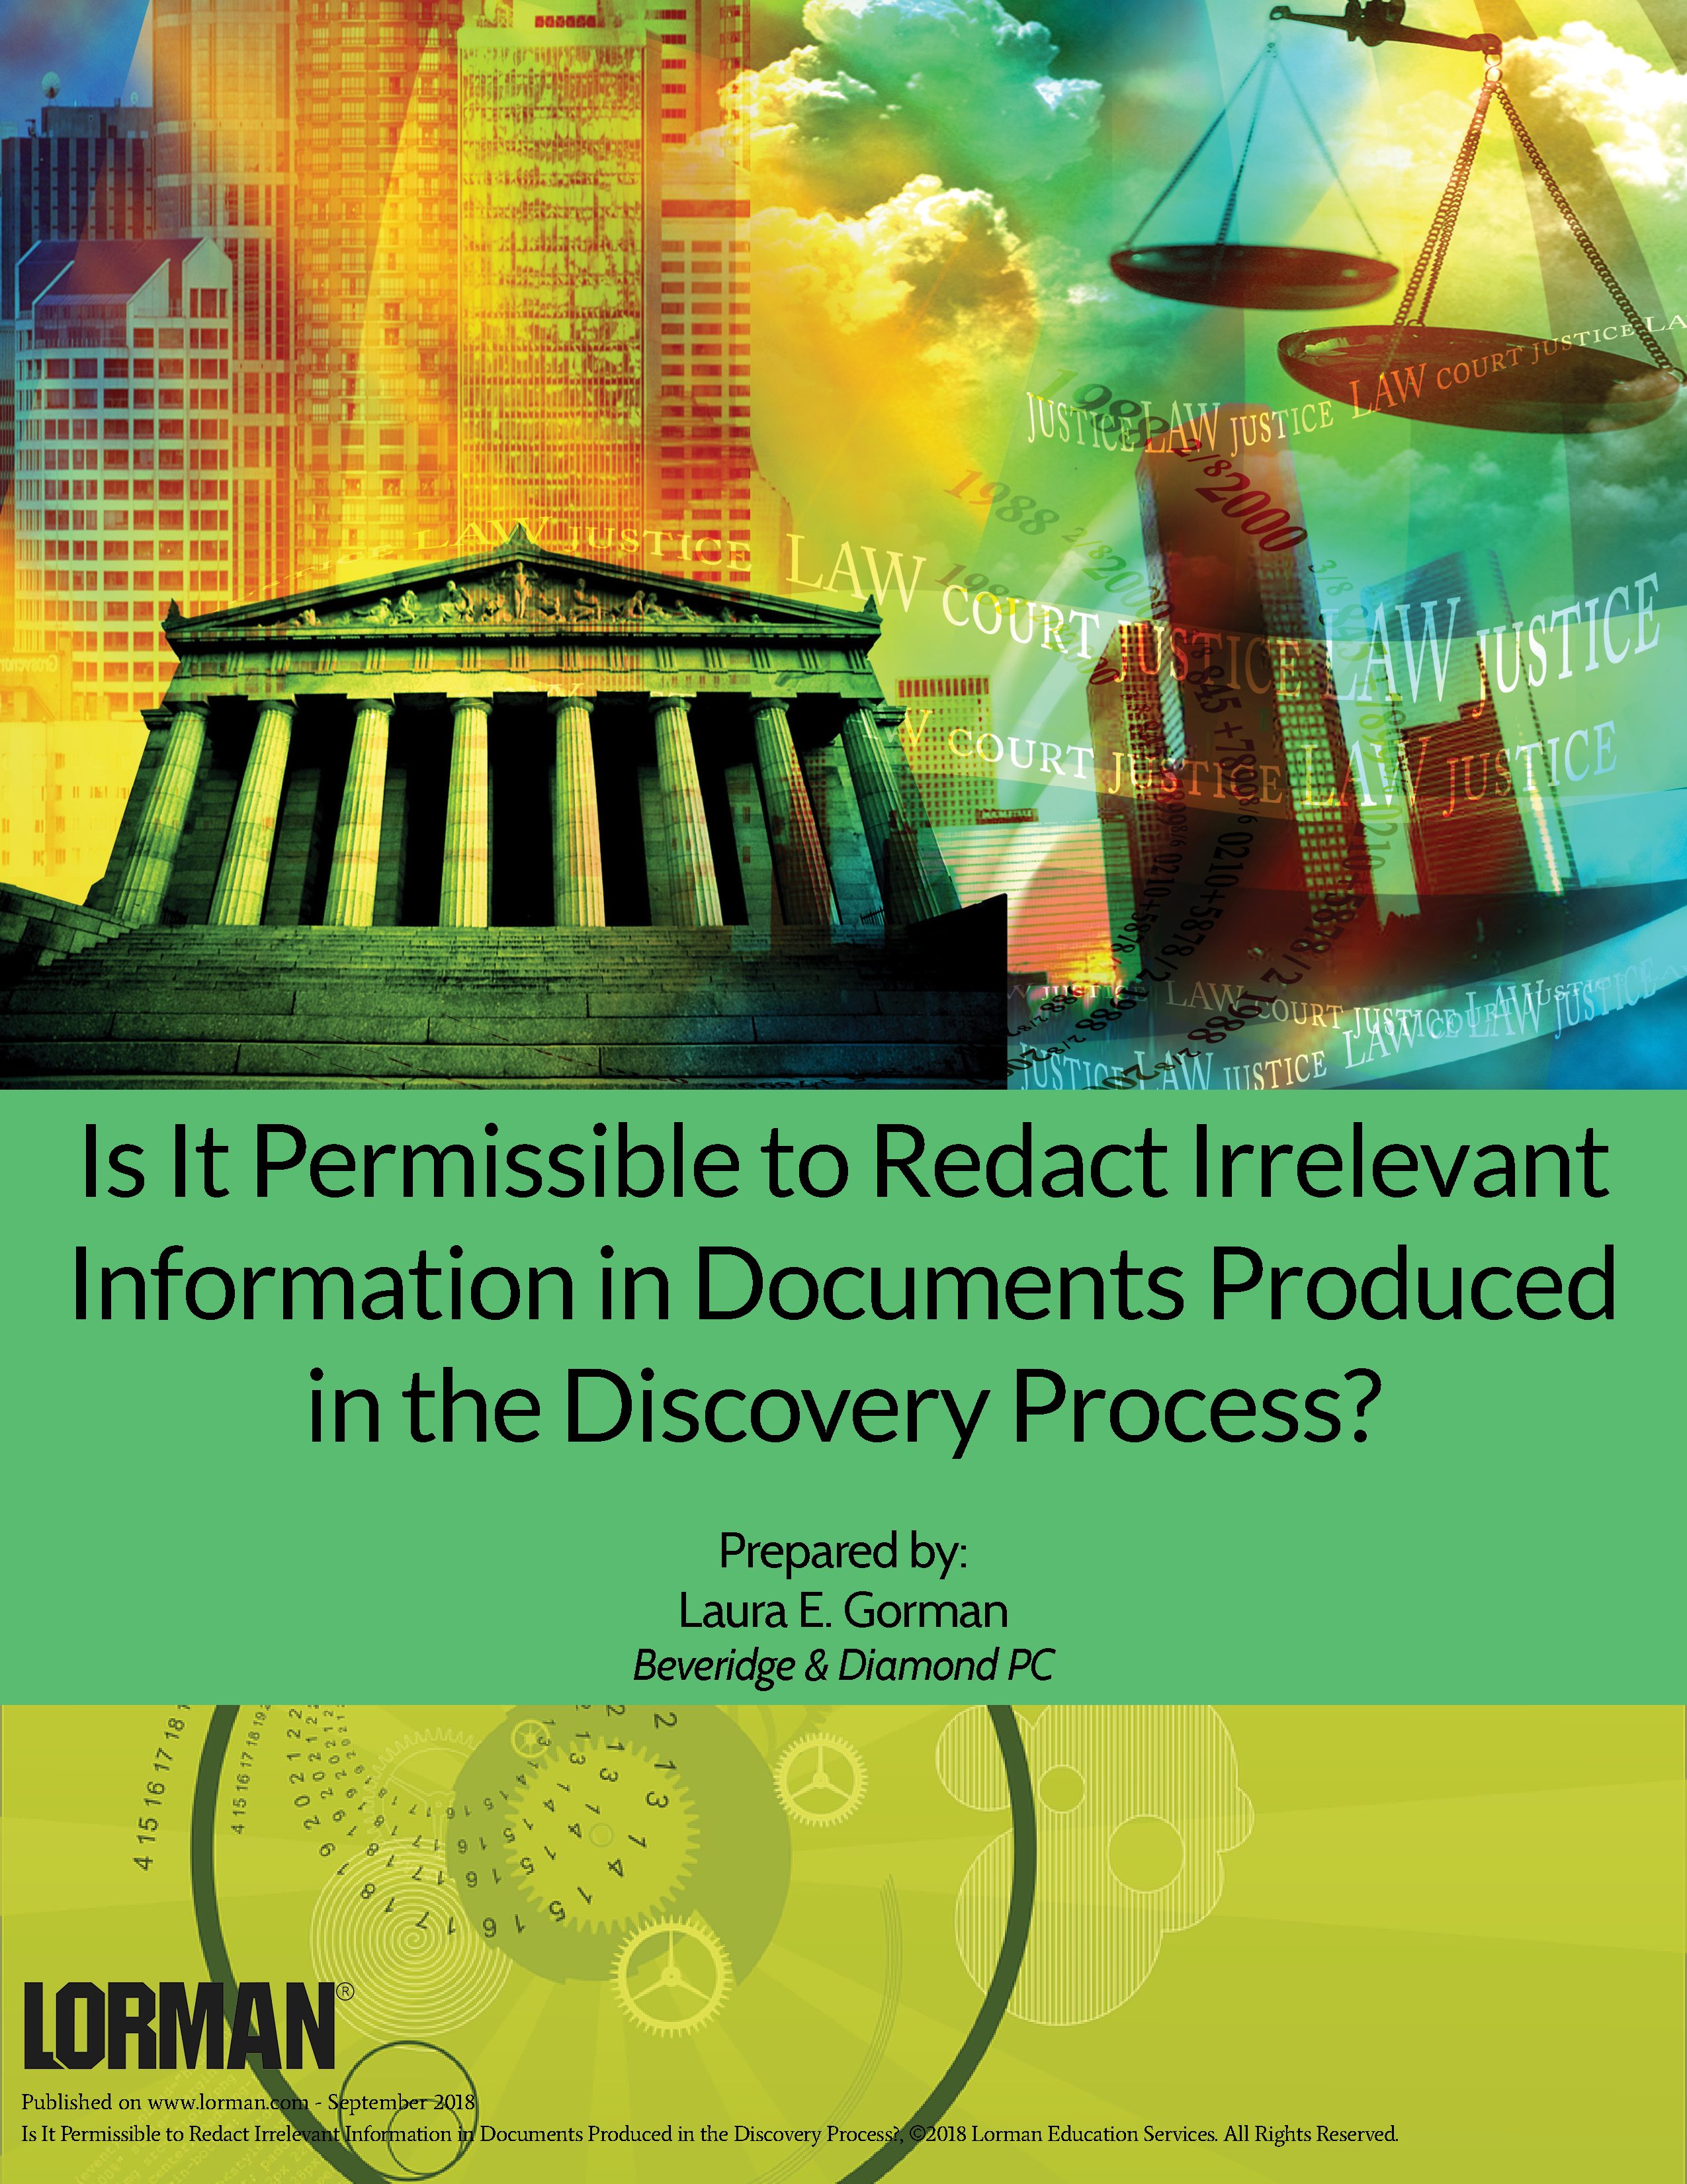 Is It Permissible to Redact Irrelevant Information in Documents Produced in the Discovery Process?